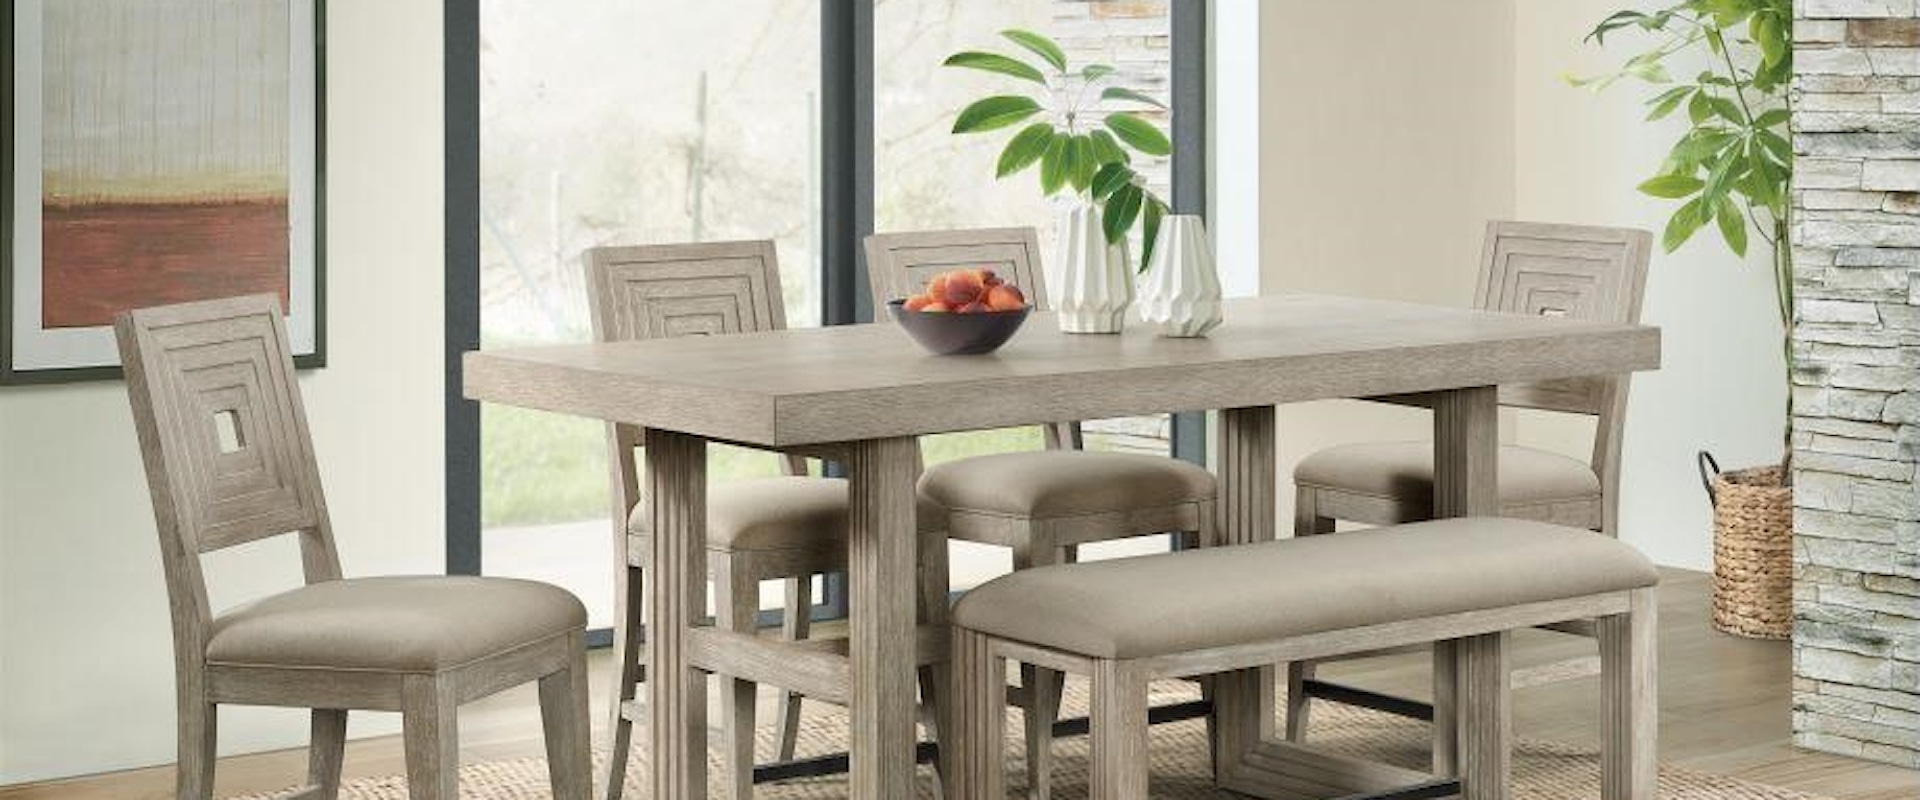  Counter Height Dining Set includes Table, 4 Chairs. *Bench Sold Separately 